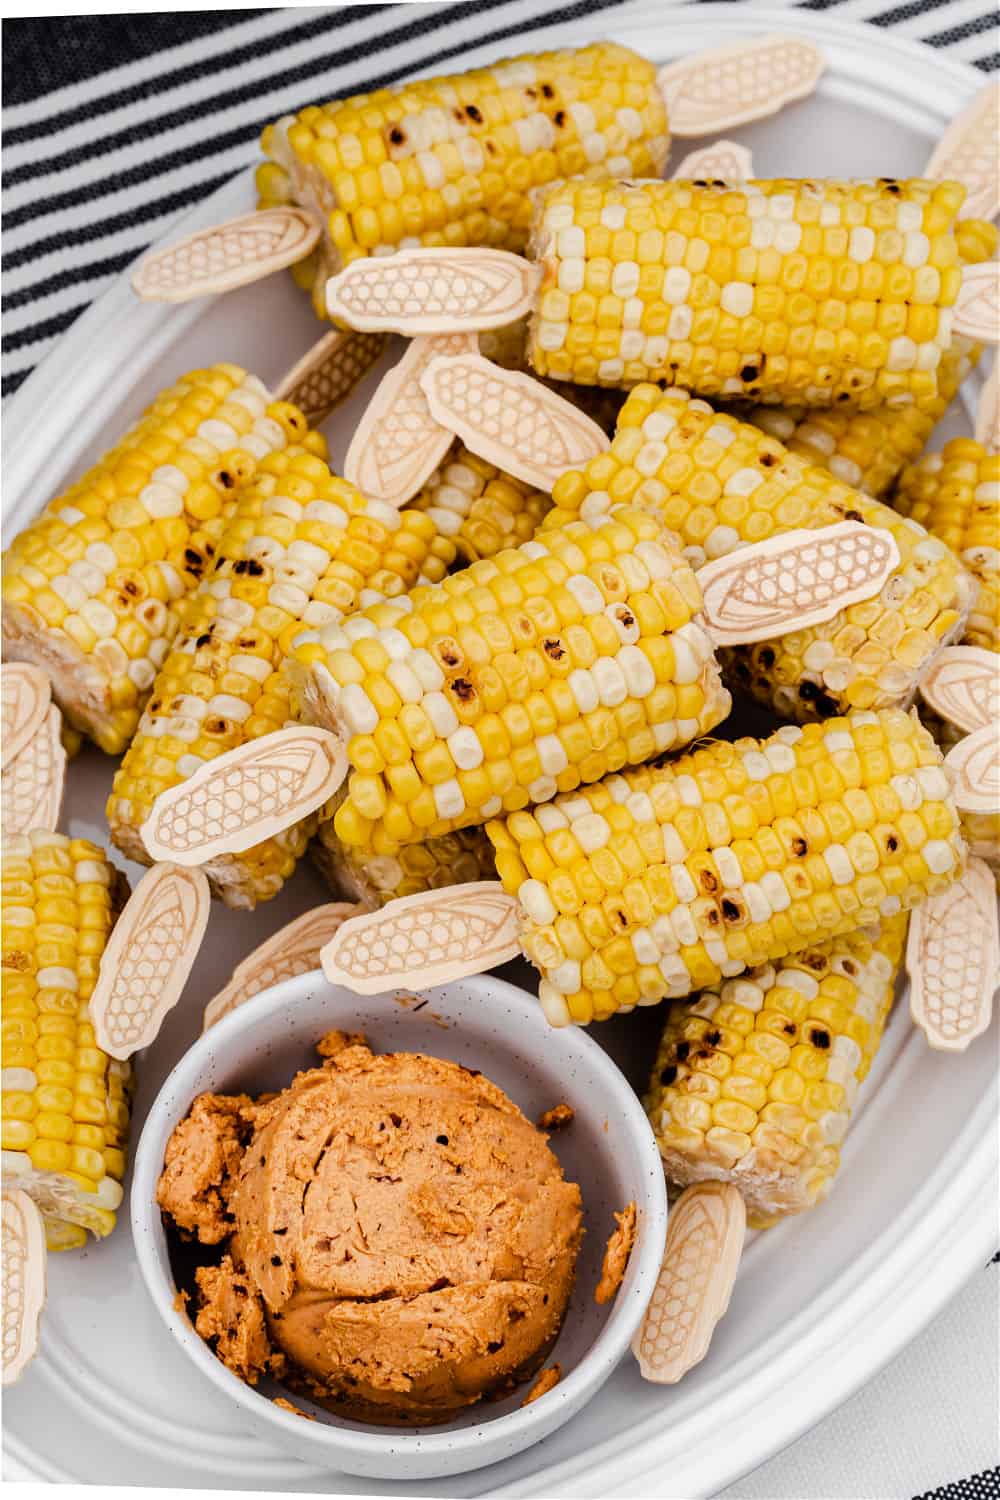 corn on the cob with flavored butter, on white plate